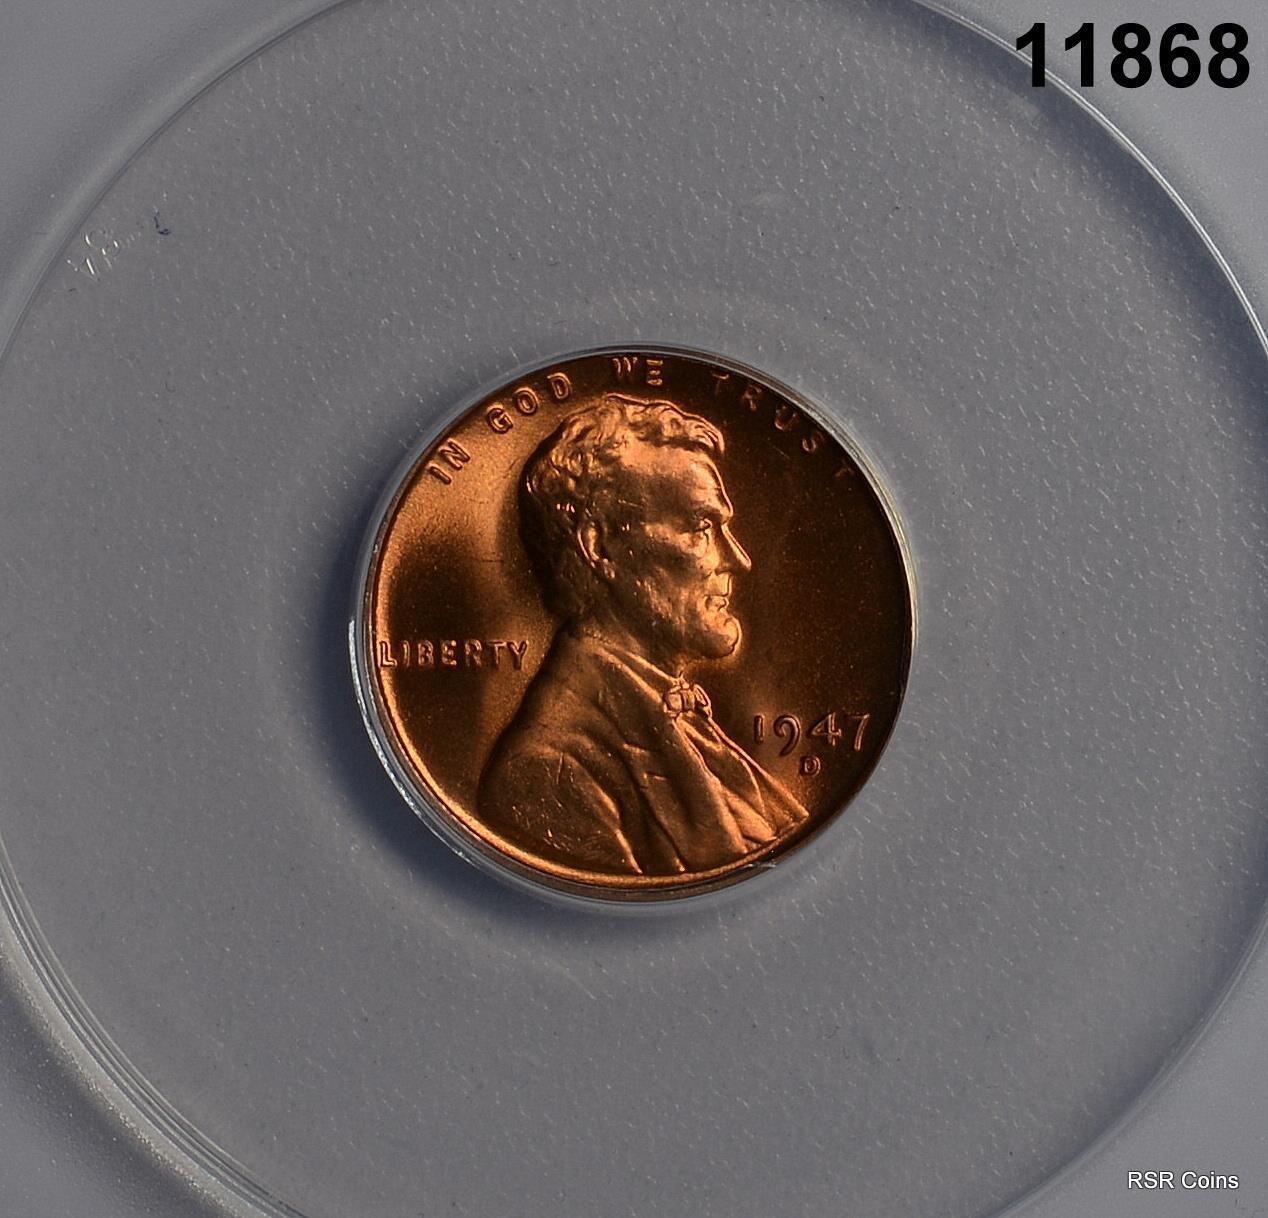 1947 D LINCOLN CENT ANACS CERTIFIED MS66 RD! FINE RED! #11868